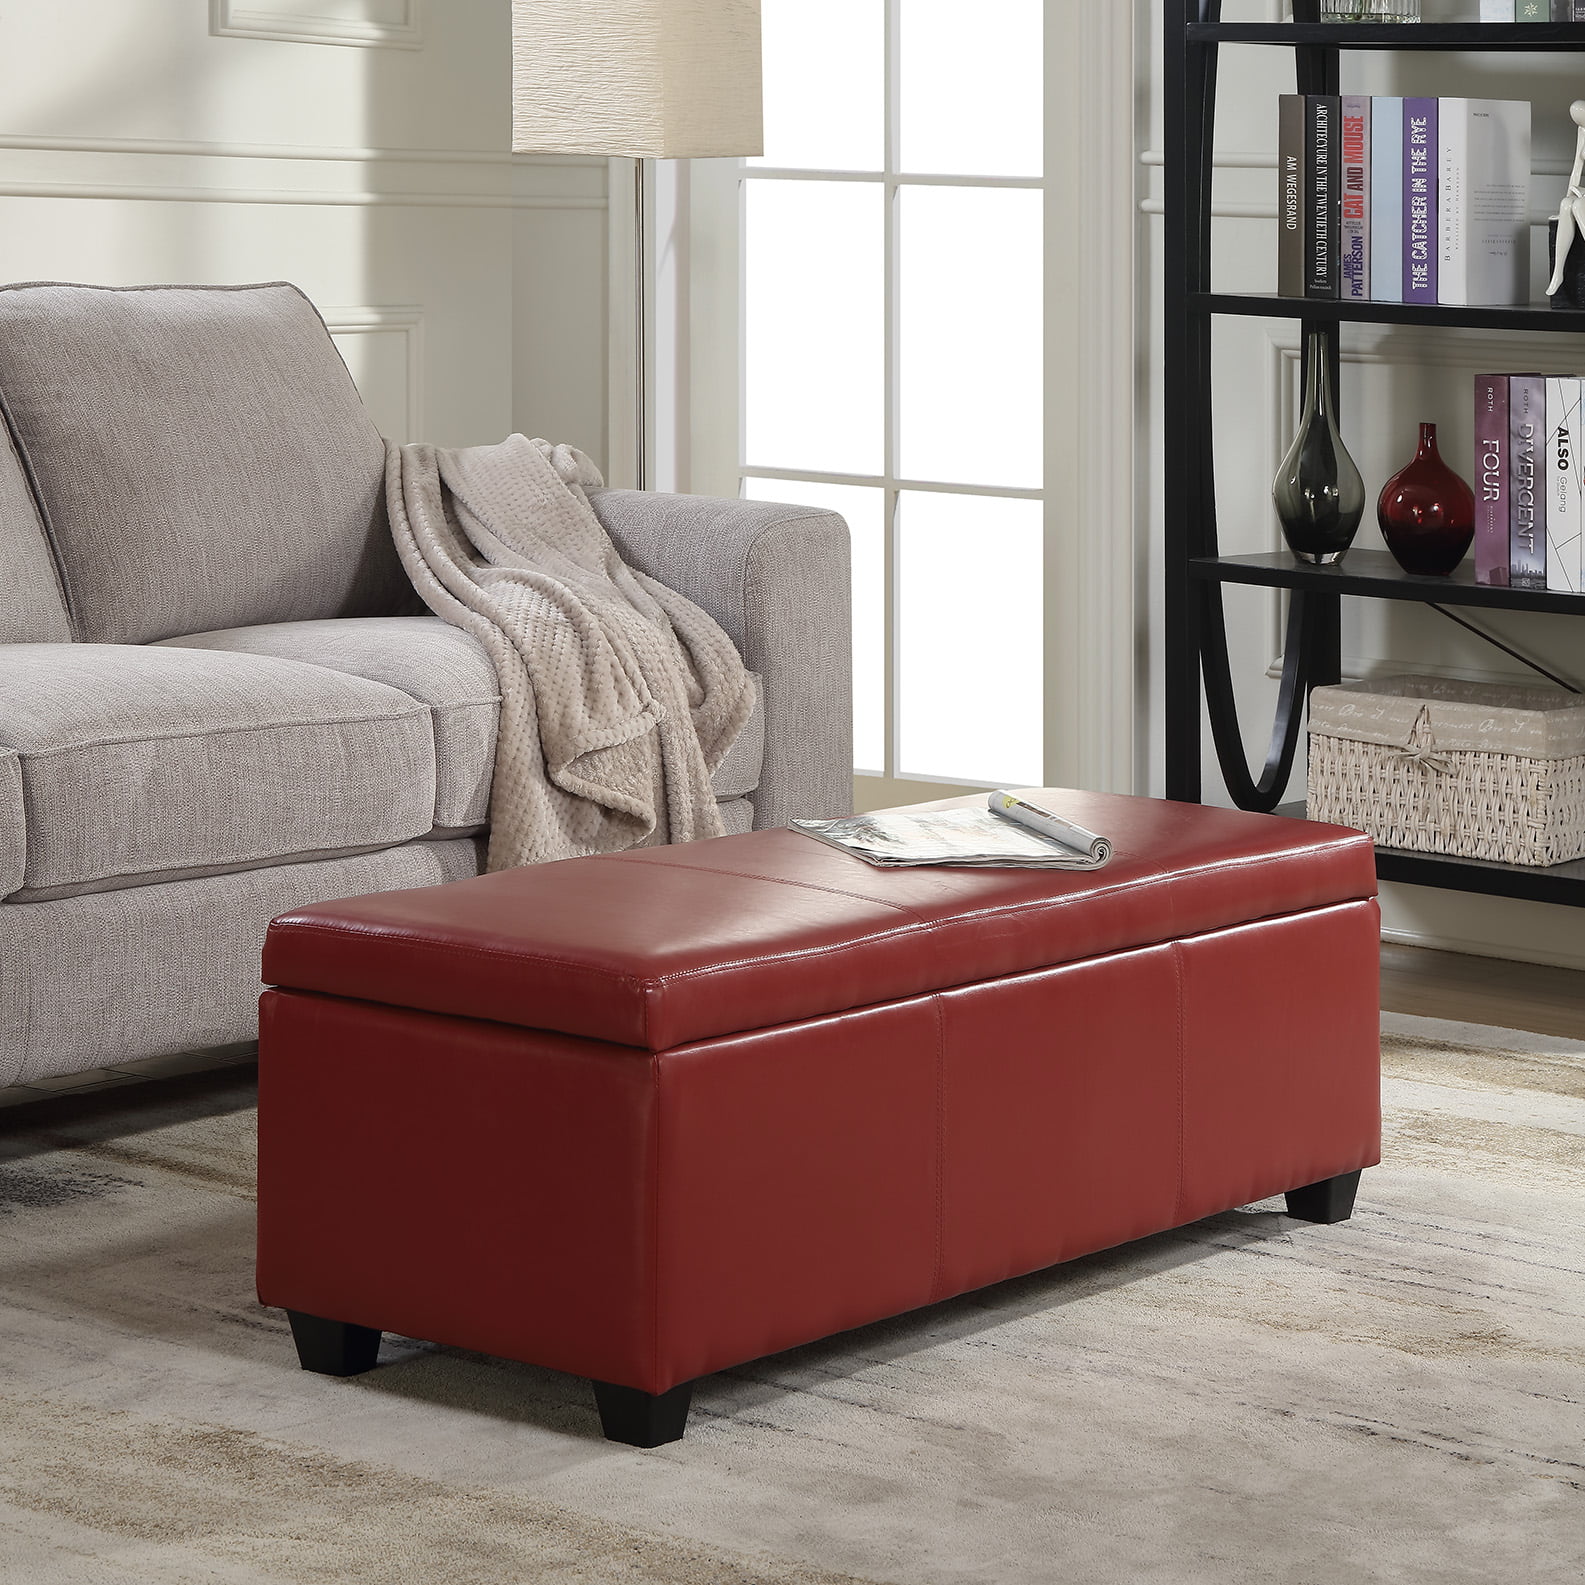 Belleze Rectangular Ottoman Bench Top, Ottoman Storage Faux Leather Bed